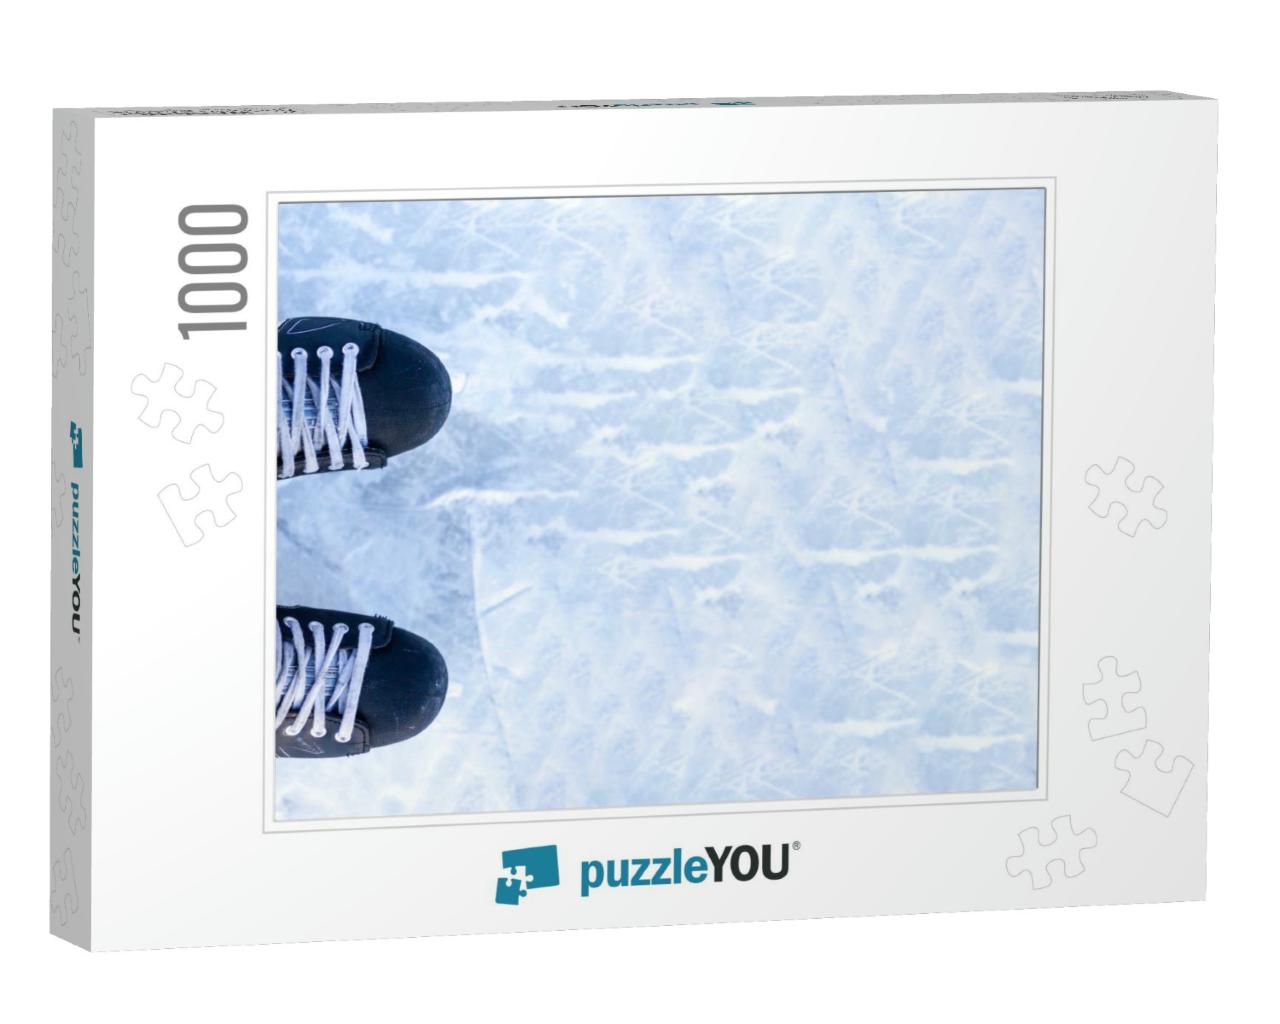 A Pair of Hockey Skates with Laces on Frozen Ice Rink Clo... Jigsaw Puzzle with 1000 pieces